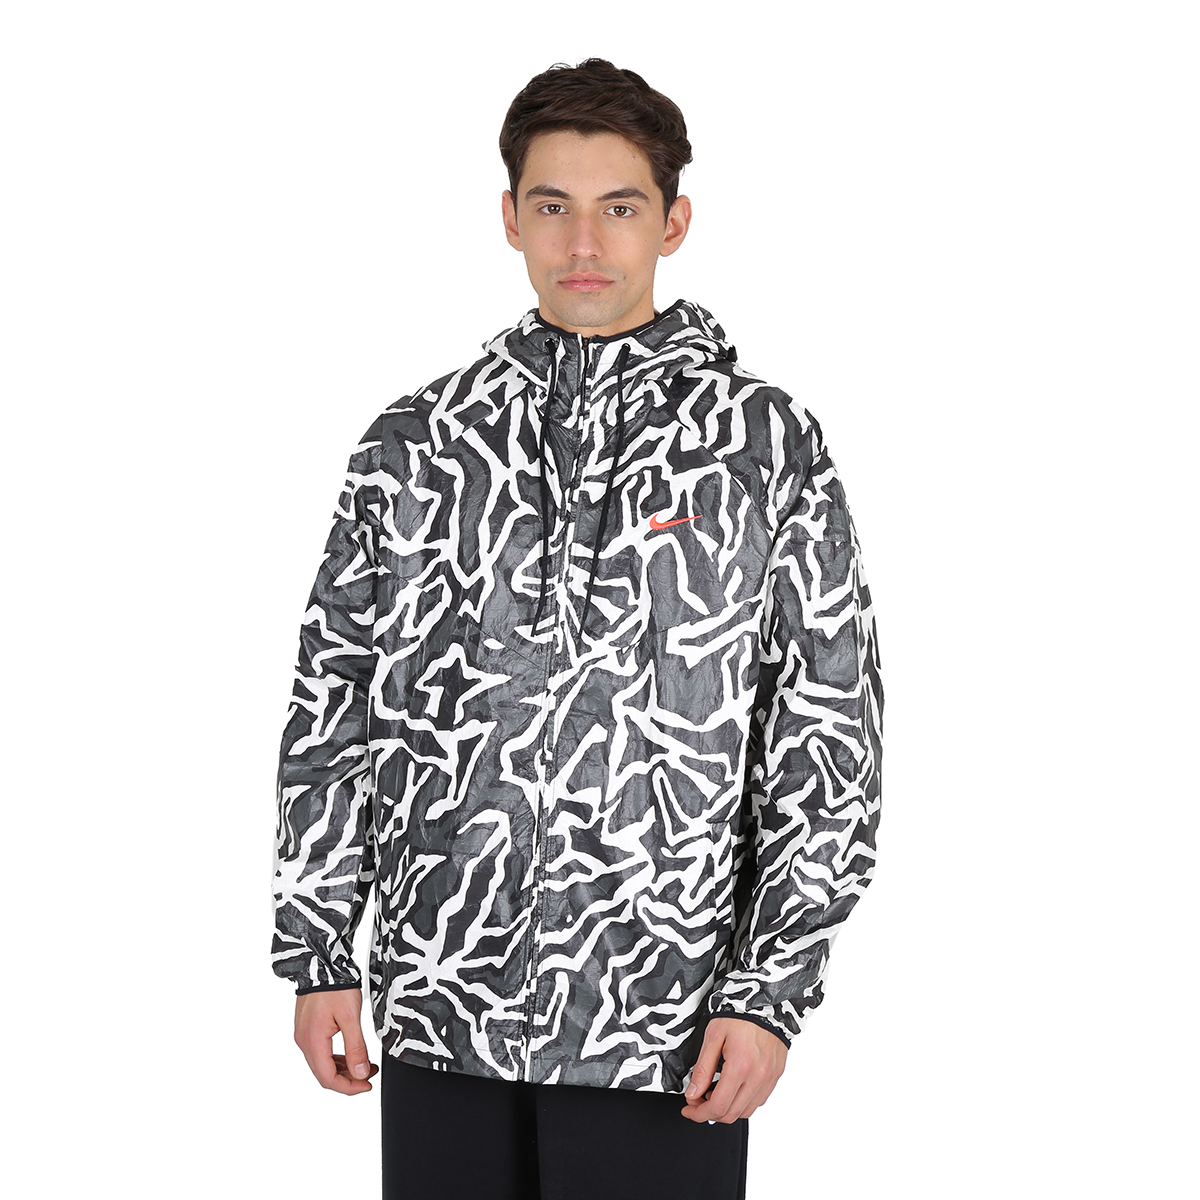 Campera Urbana Nike Trend Hombre,  image number null